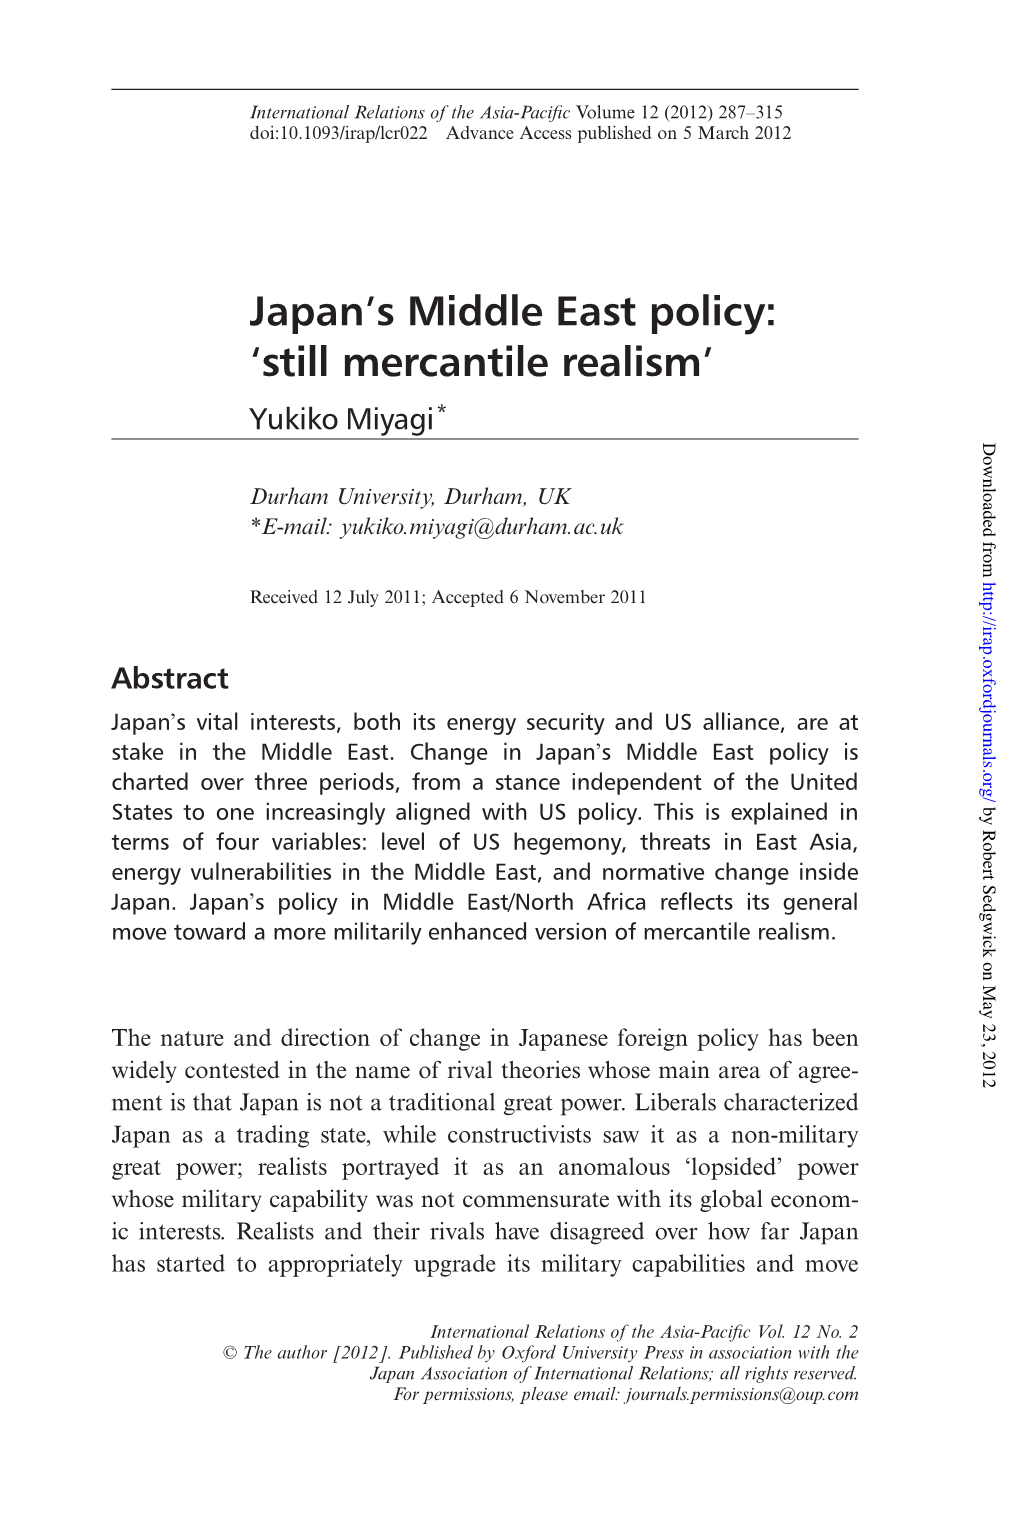 Japan's Middle East Policy: 'Still Mercantile Realism'